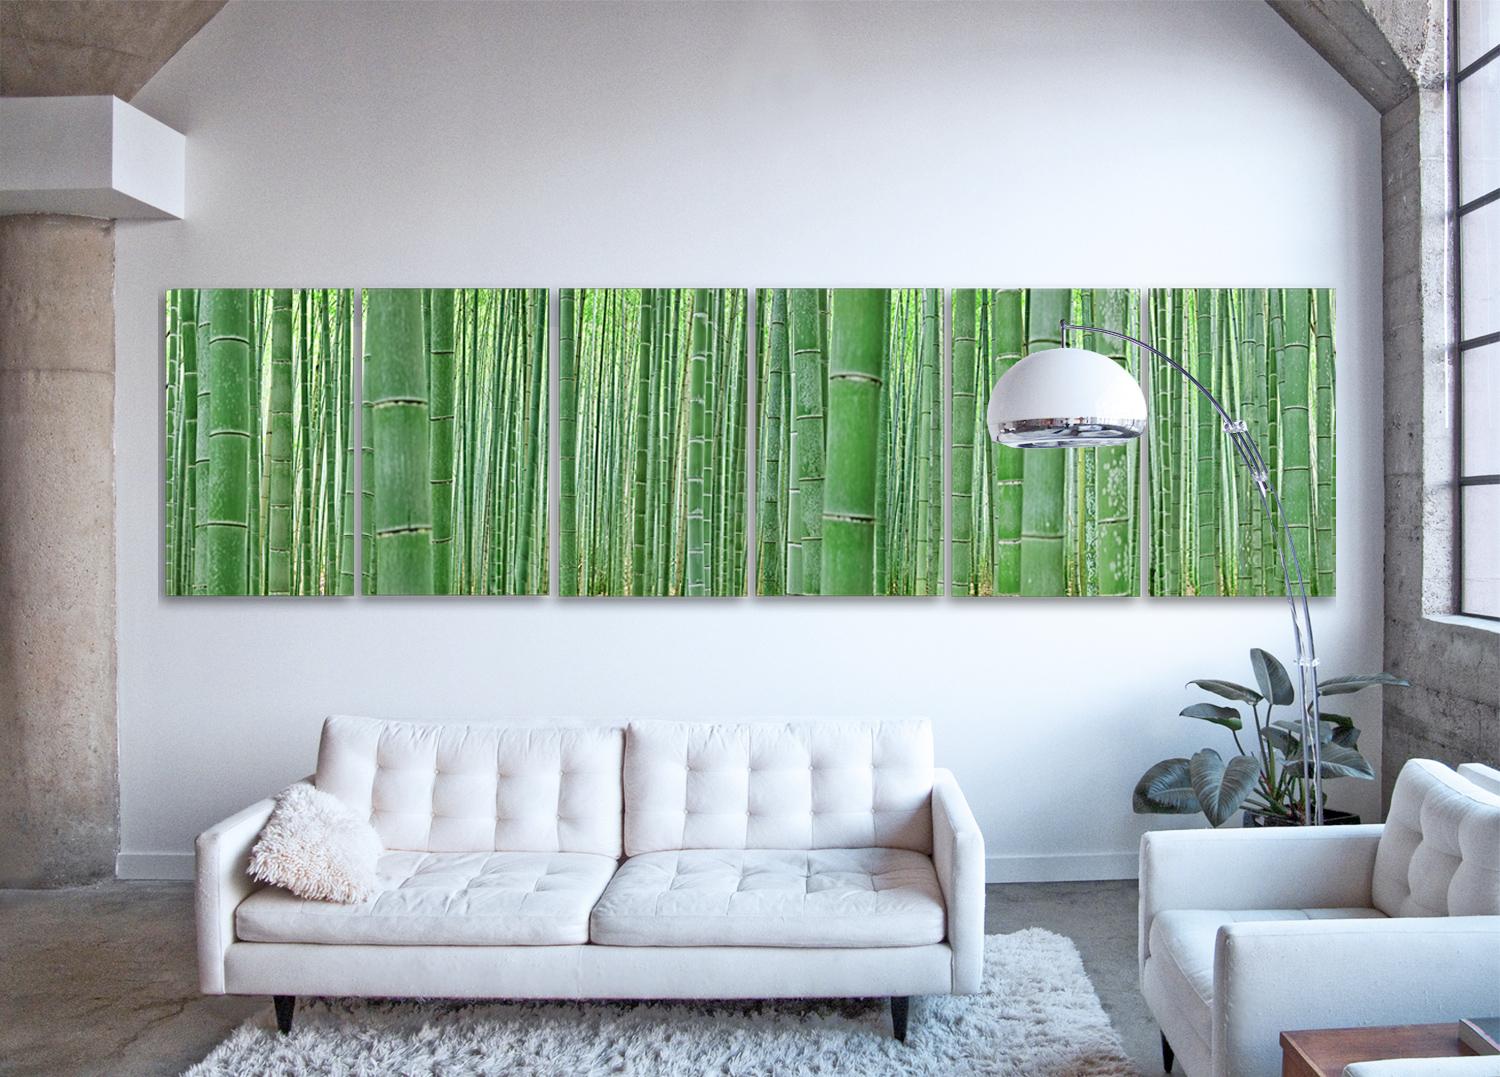 Bamboo Forest (6 panels) - abstract nature observation of iconic Japanese grove - Photograph by Erik Pawassar